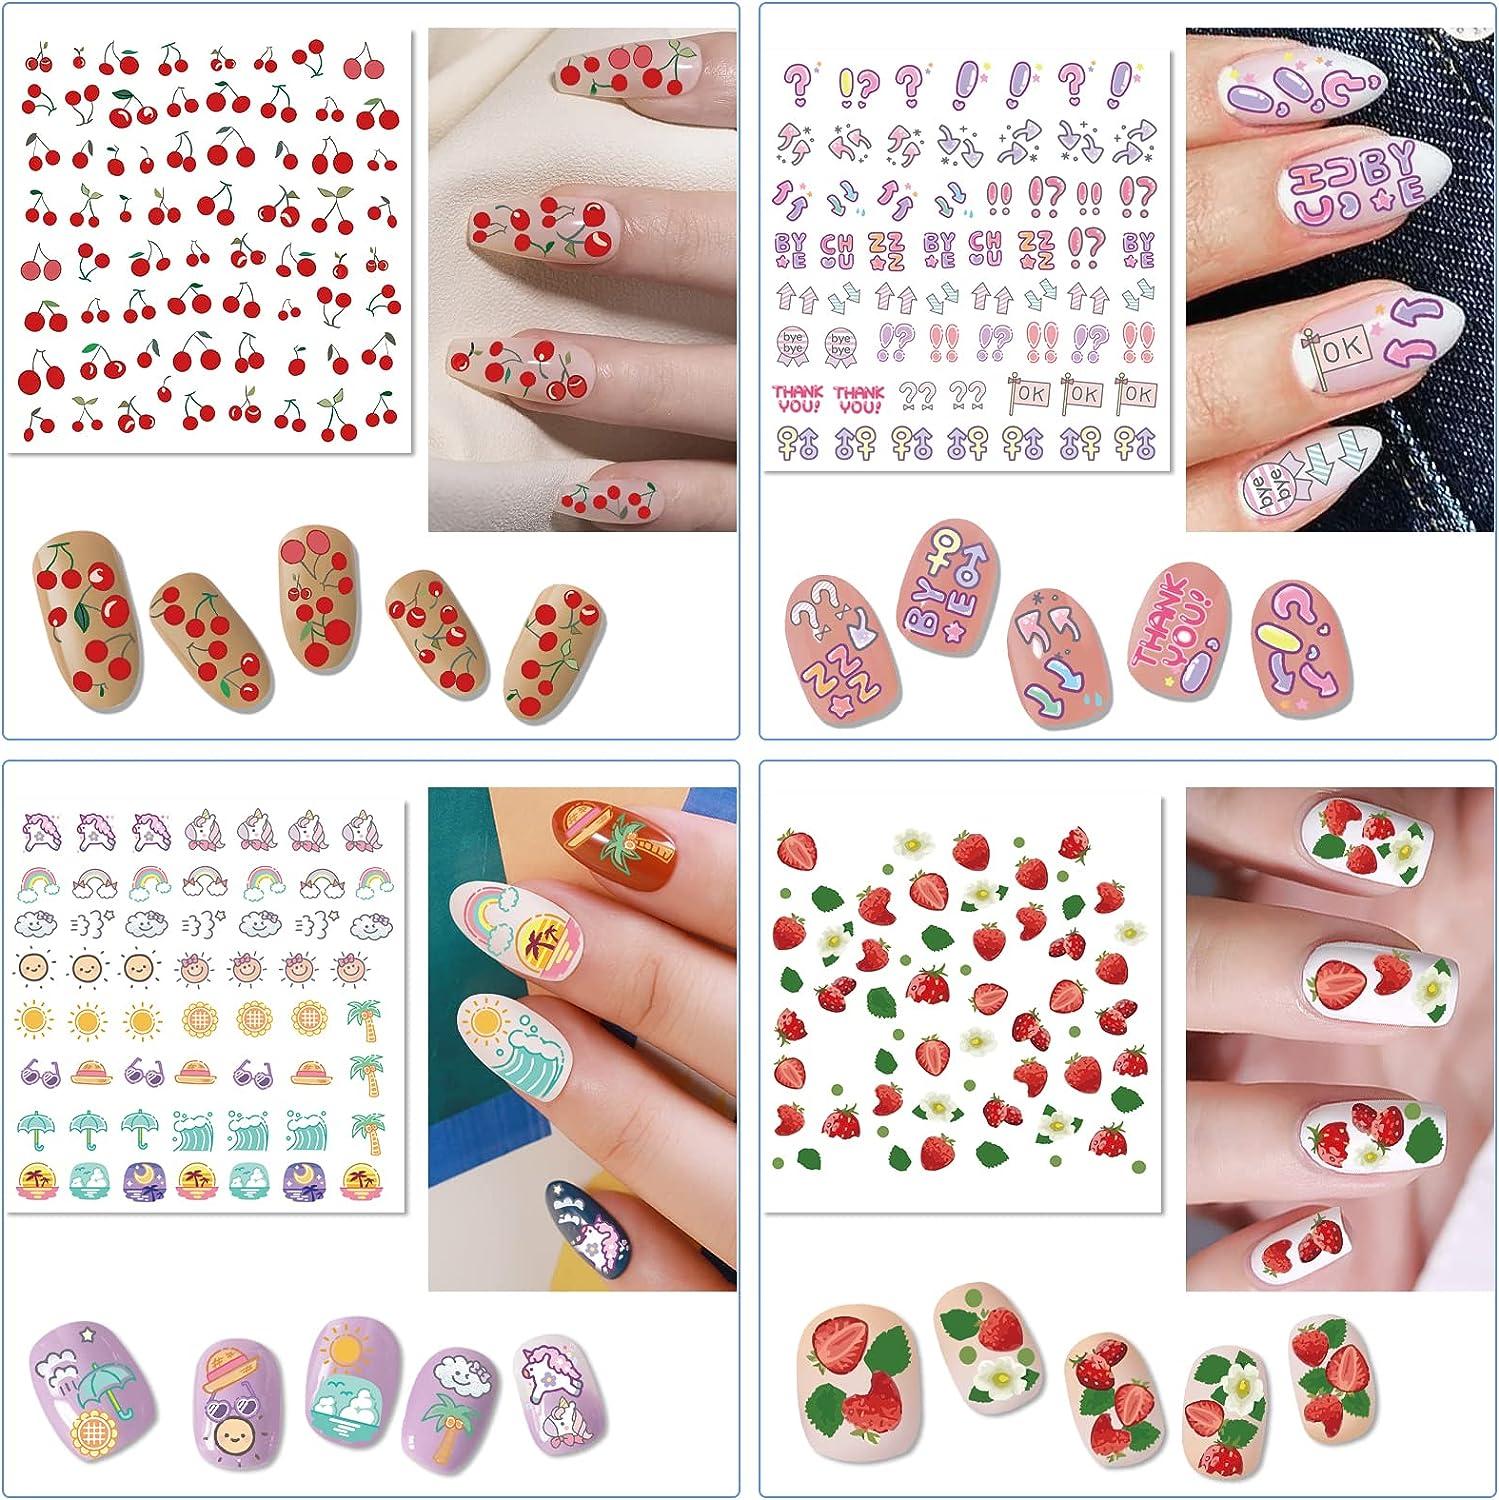 6 Amazing Tips to Make Best Nail Polish Stickers Last Longer | by Stickit  Nails | Medium